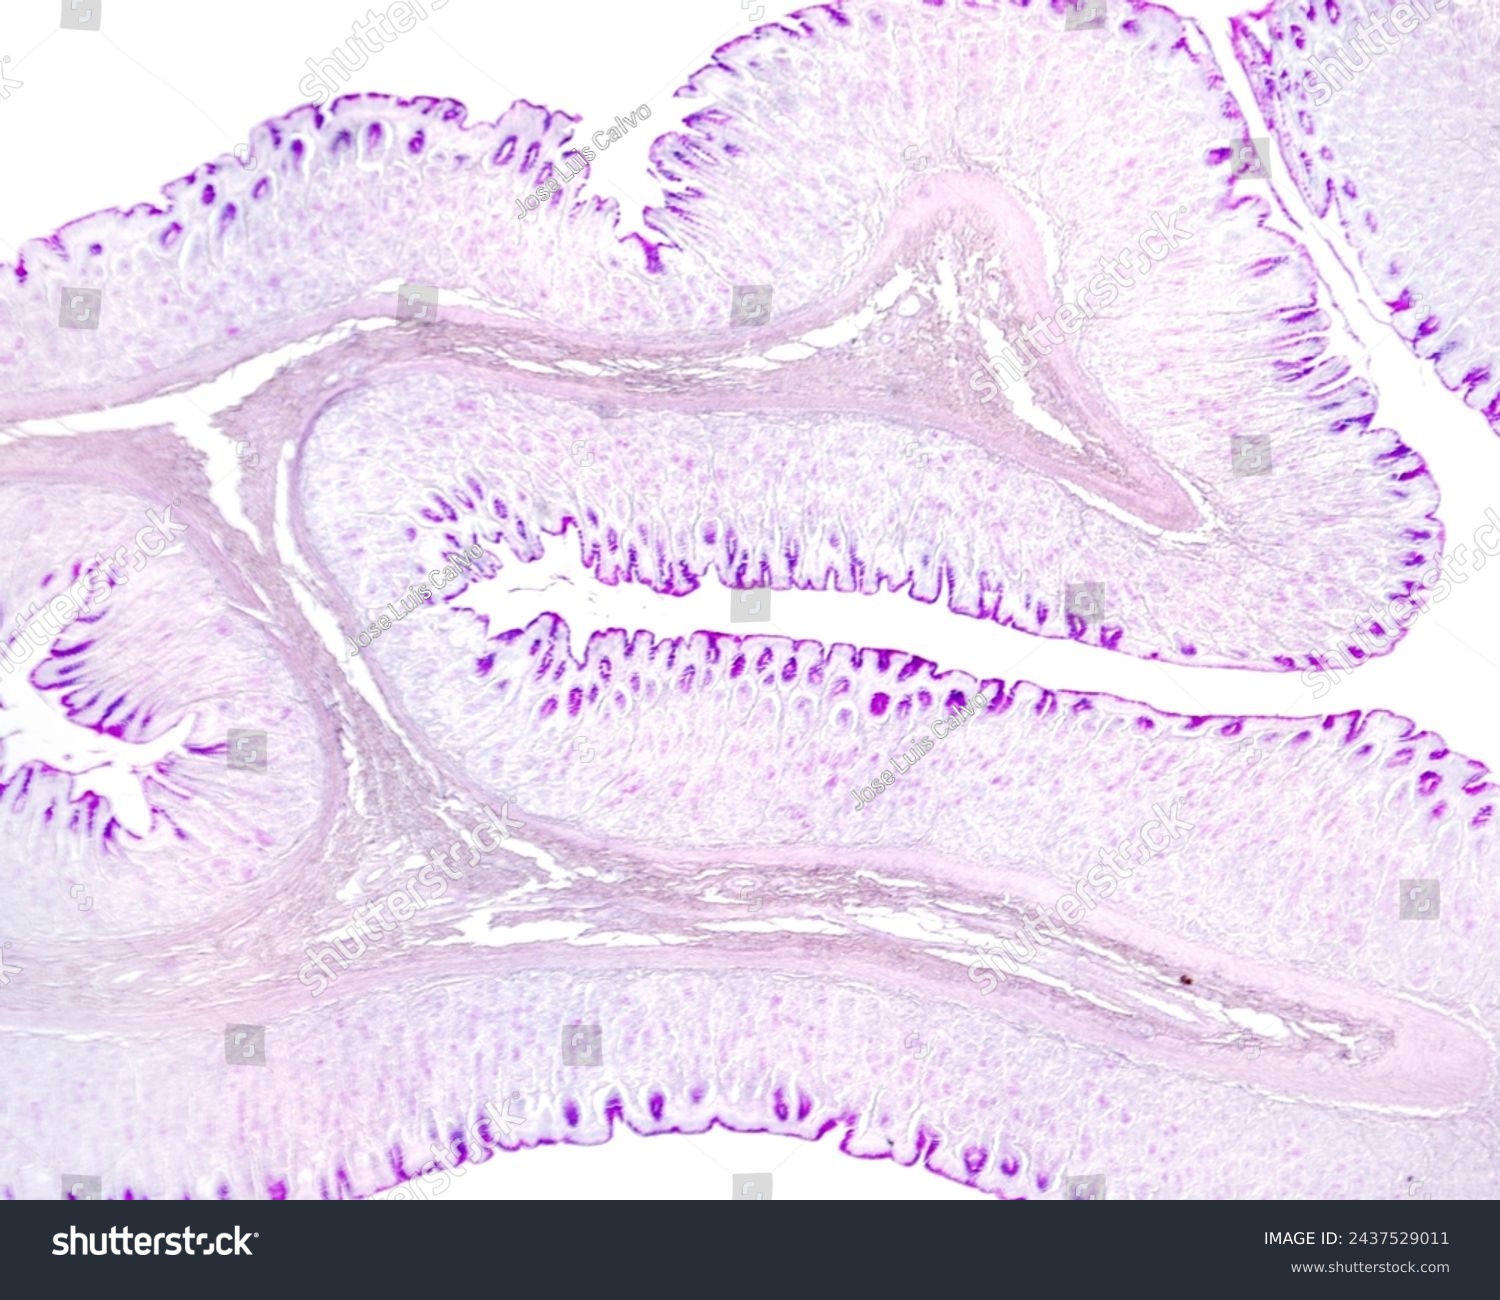 Gastric wall mucosa showing many folds with an axis of submucosa. In the mucosa, the mucous surface epithelium and foveolar cells of gastric pits show a great PAS positivity. PAS method. #2437529011